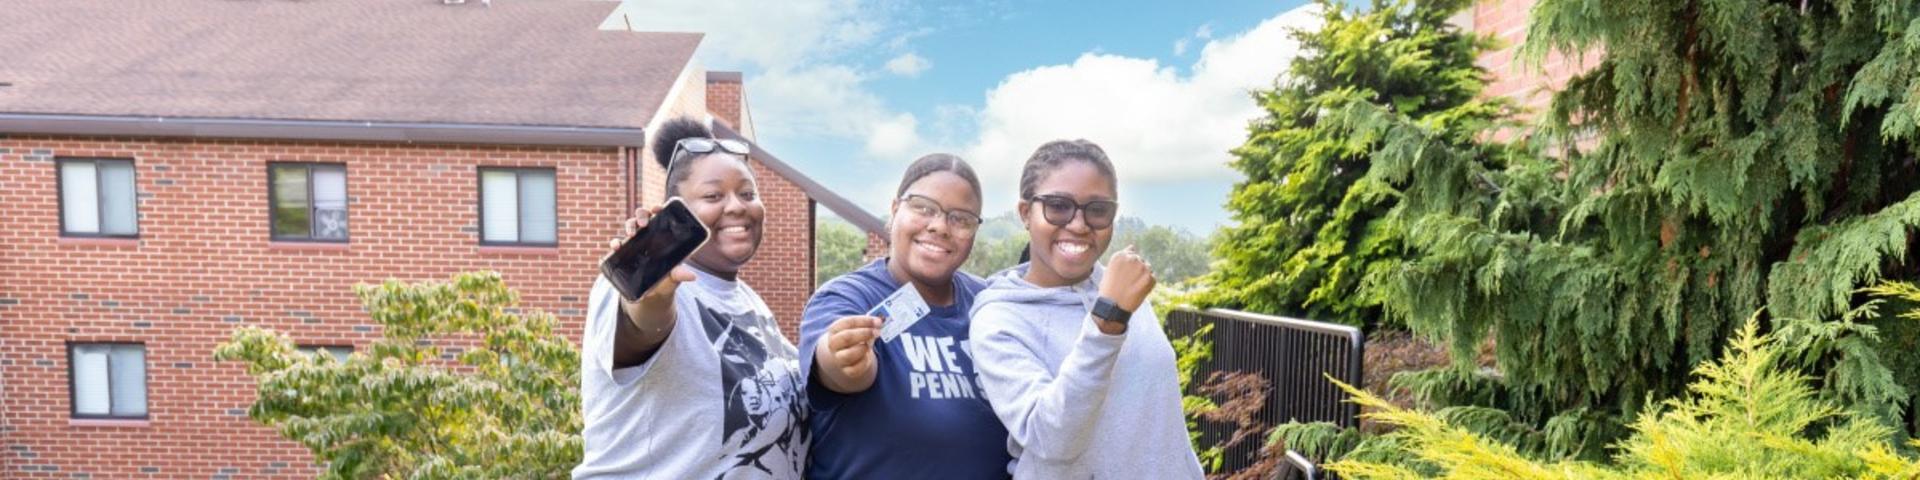 three people holding forms of Penn State identification